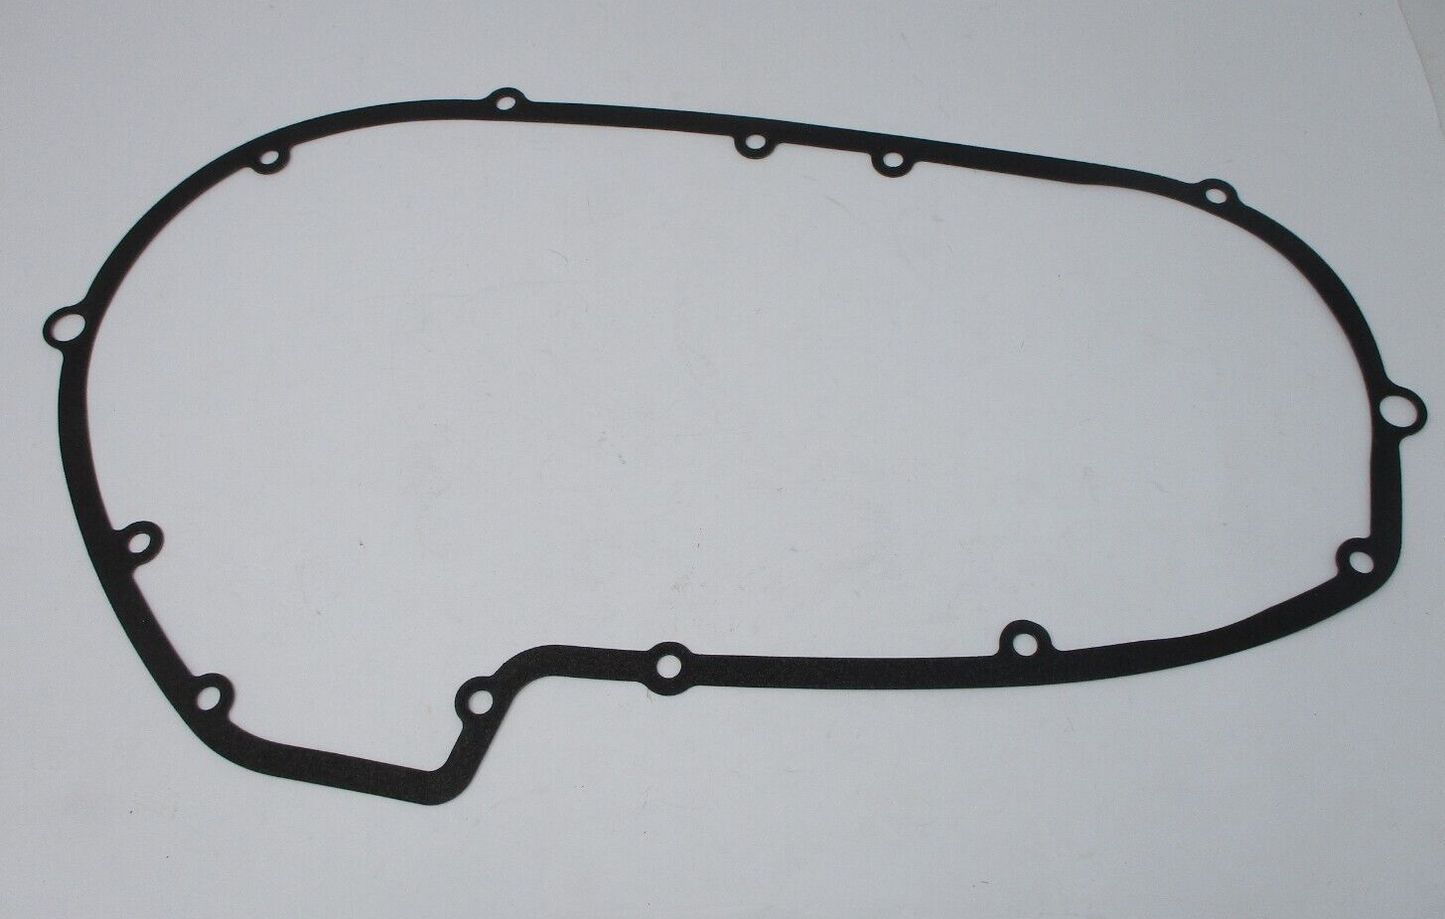 Buell 03-10 XB Primary Cover Gasket   25378-02B